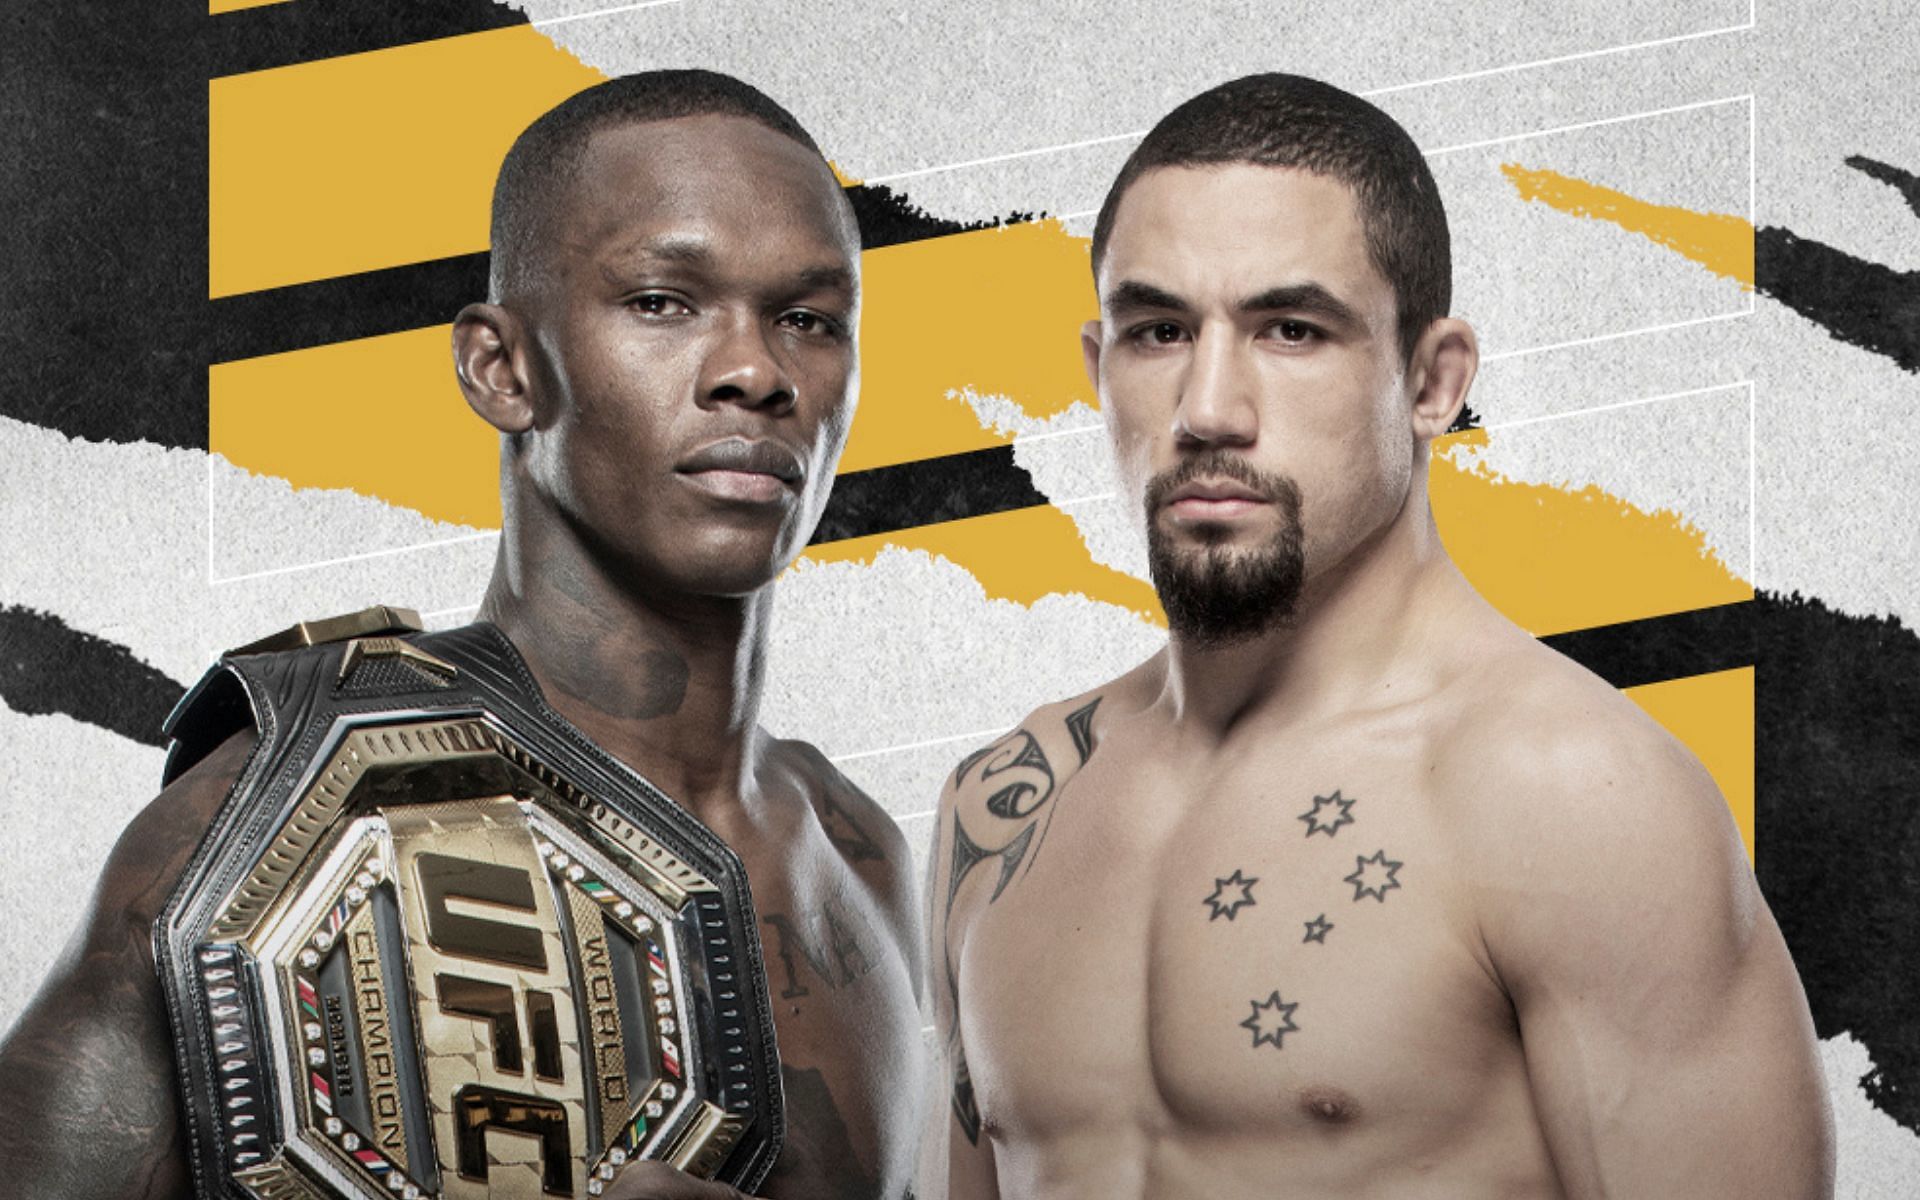 Israel Adesanya will face Robert Whittaker at UFC 271 in a rematch for the middleweight championship [Credits: @UFC via Twitter]